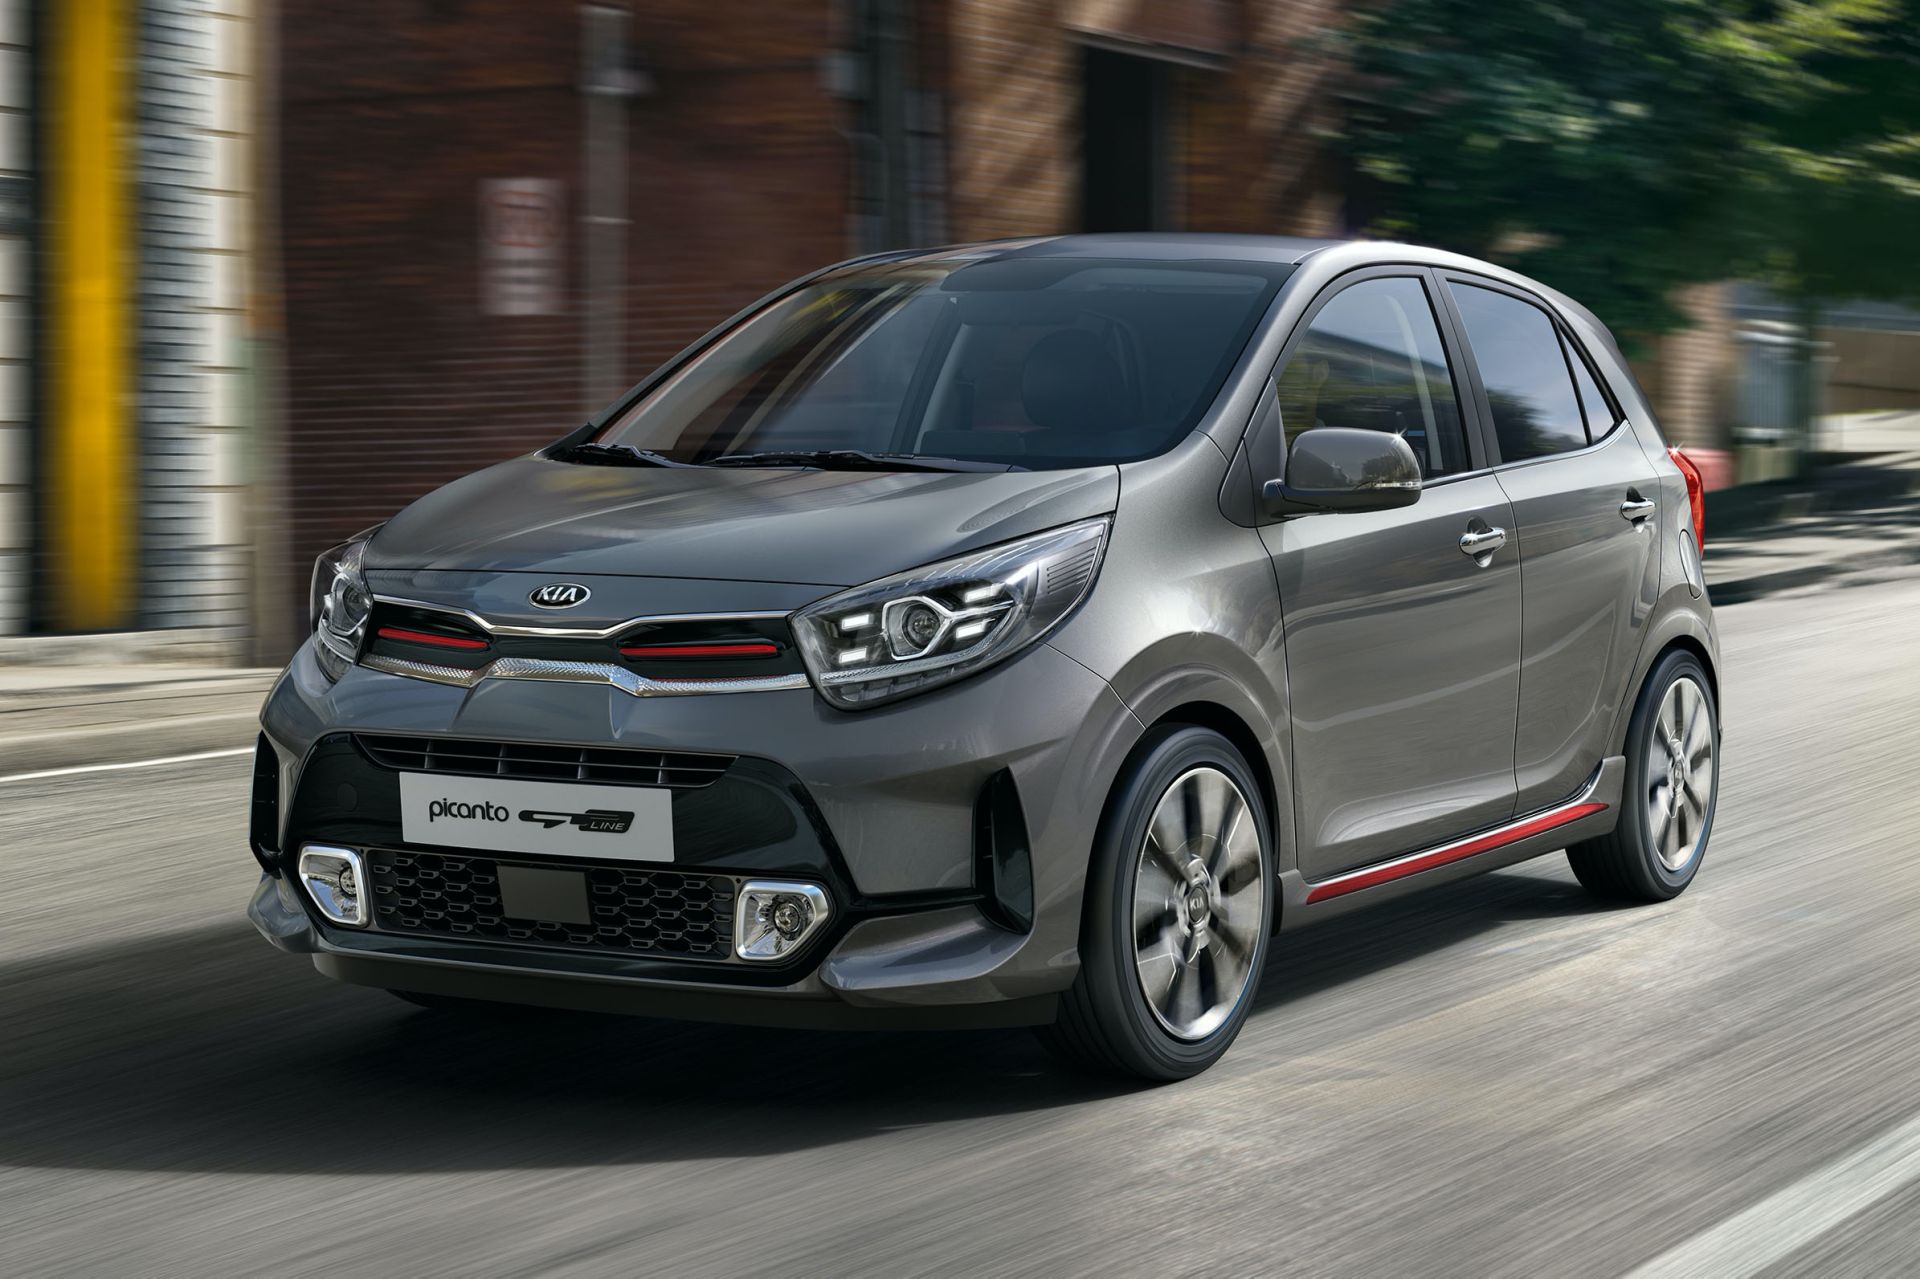 2021 Kia Picanto Debuts In Europe With Updated Styling, Tech From Upper